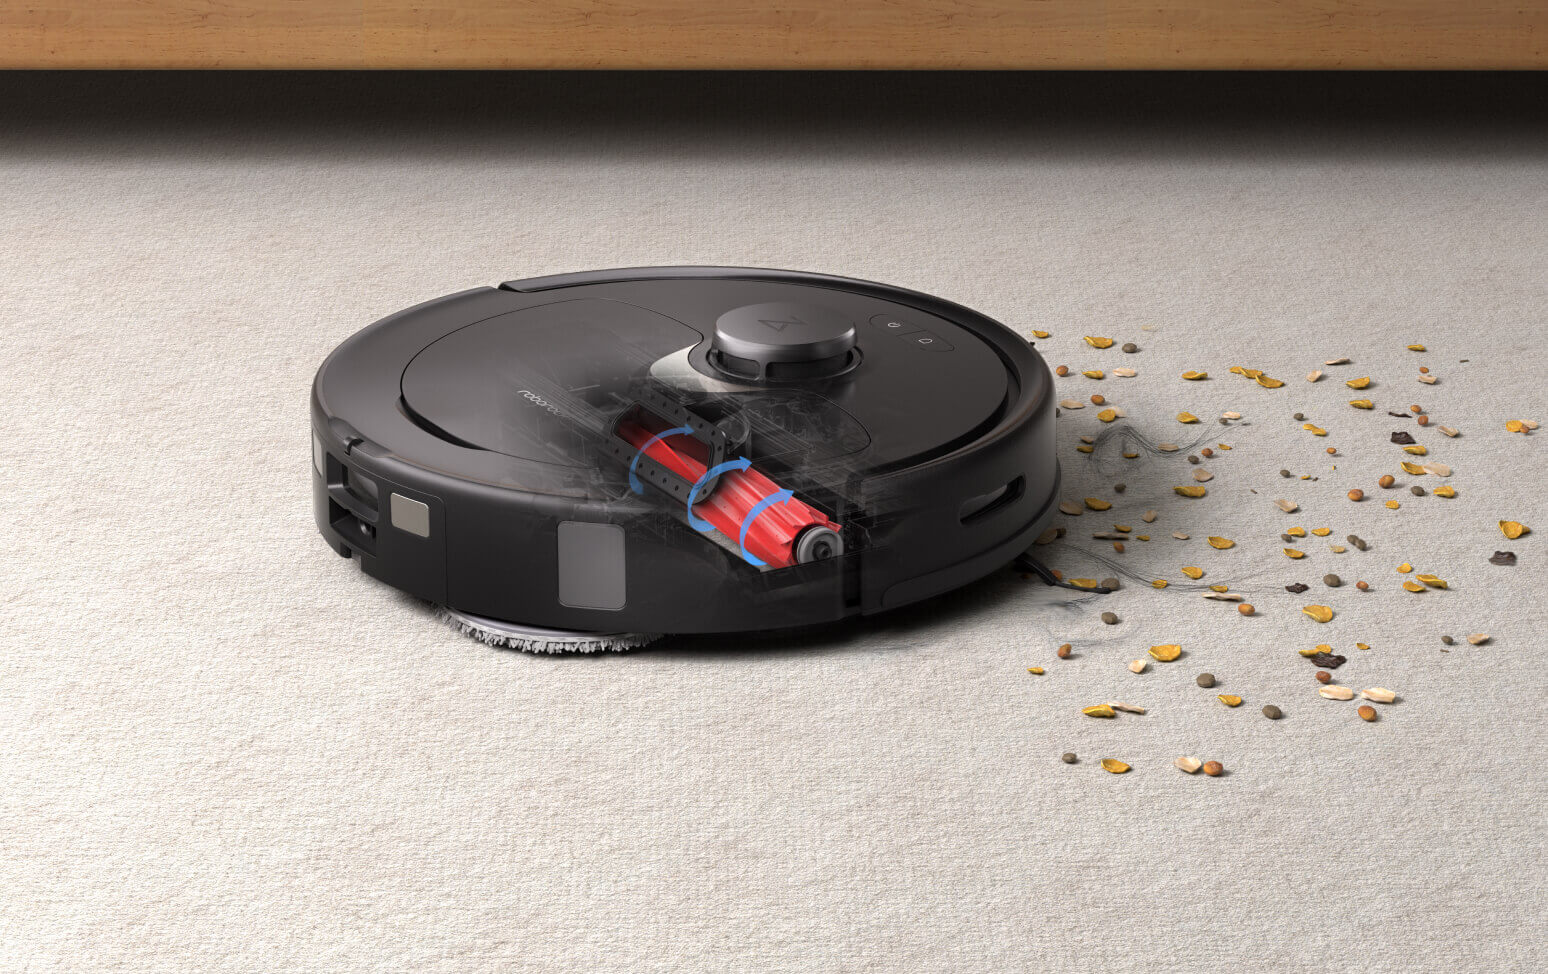 Roborock Q Revo powerful robot vacuum and mop was just unveiled